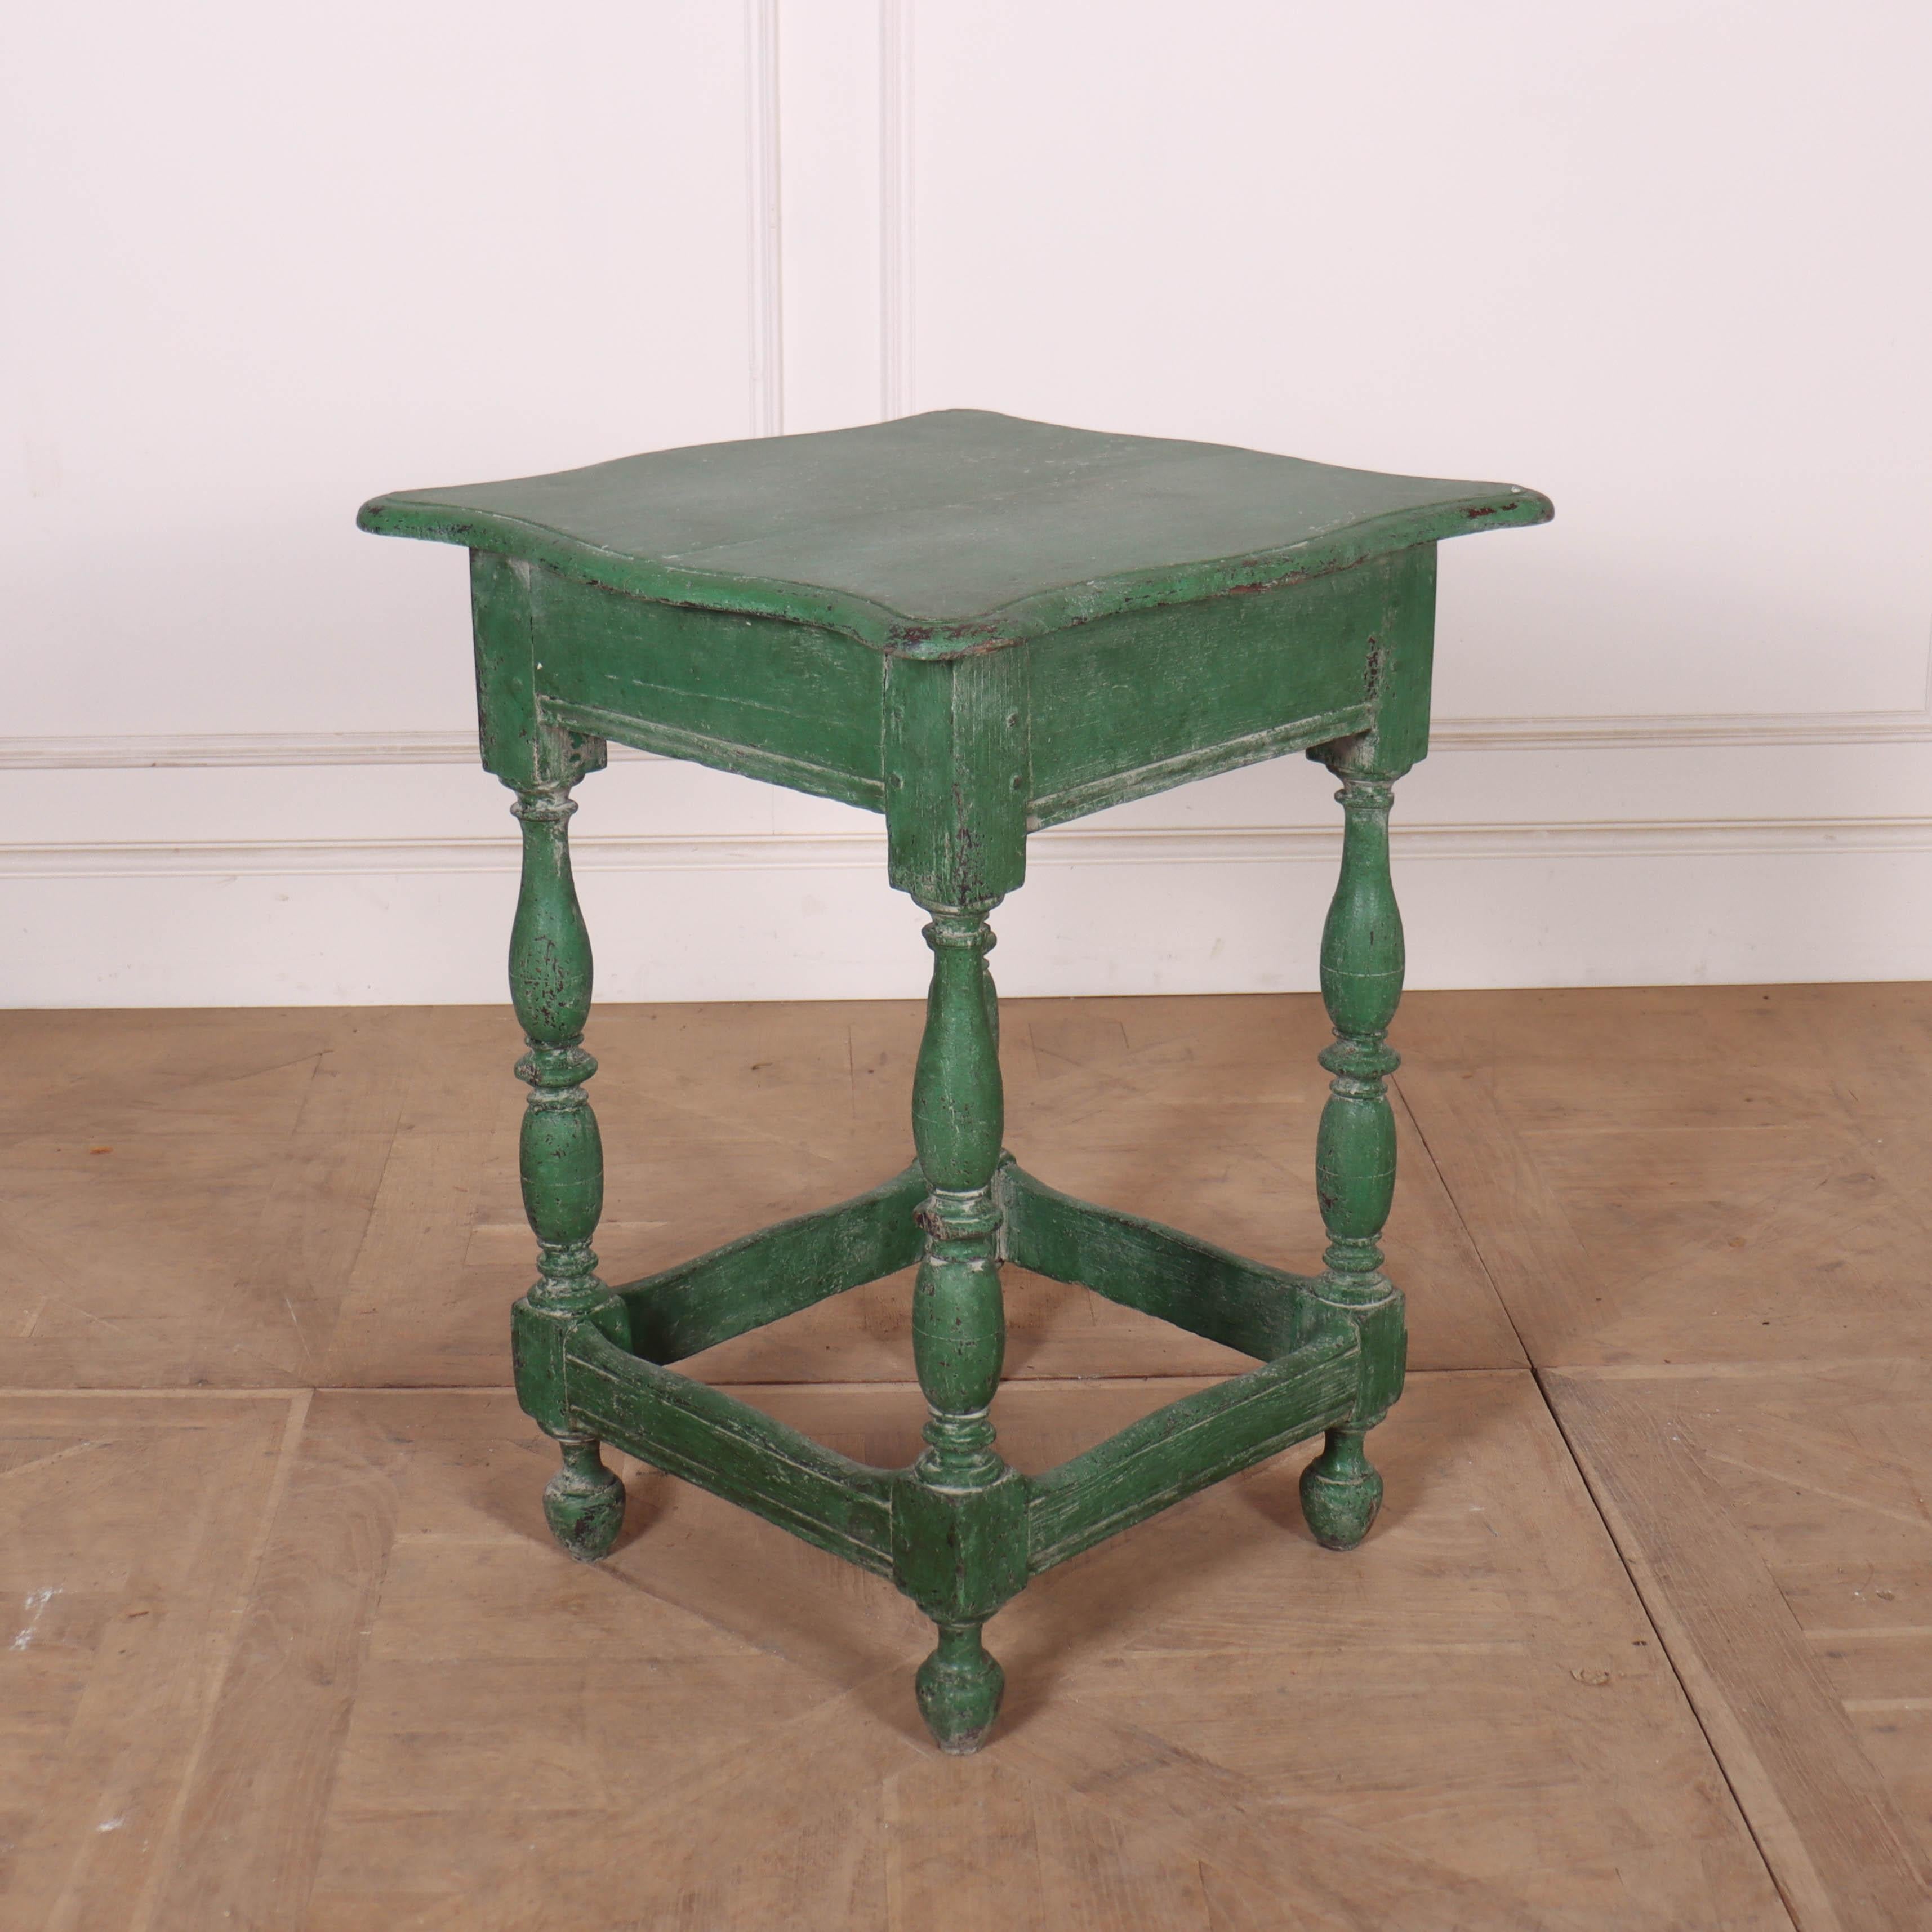 18th century English painted oak lamp table with a shaped top. 1780.

Reference: 7864

Dimensions
22 inches (56 cms) Wide
21.5 inches (55 cms) Deep
28.5 inches (72 cms) High